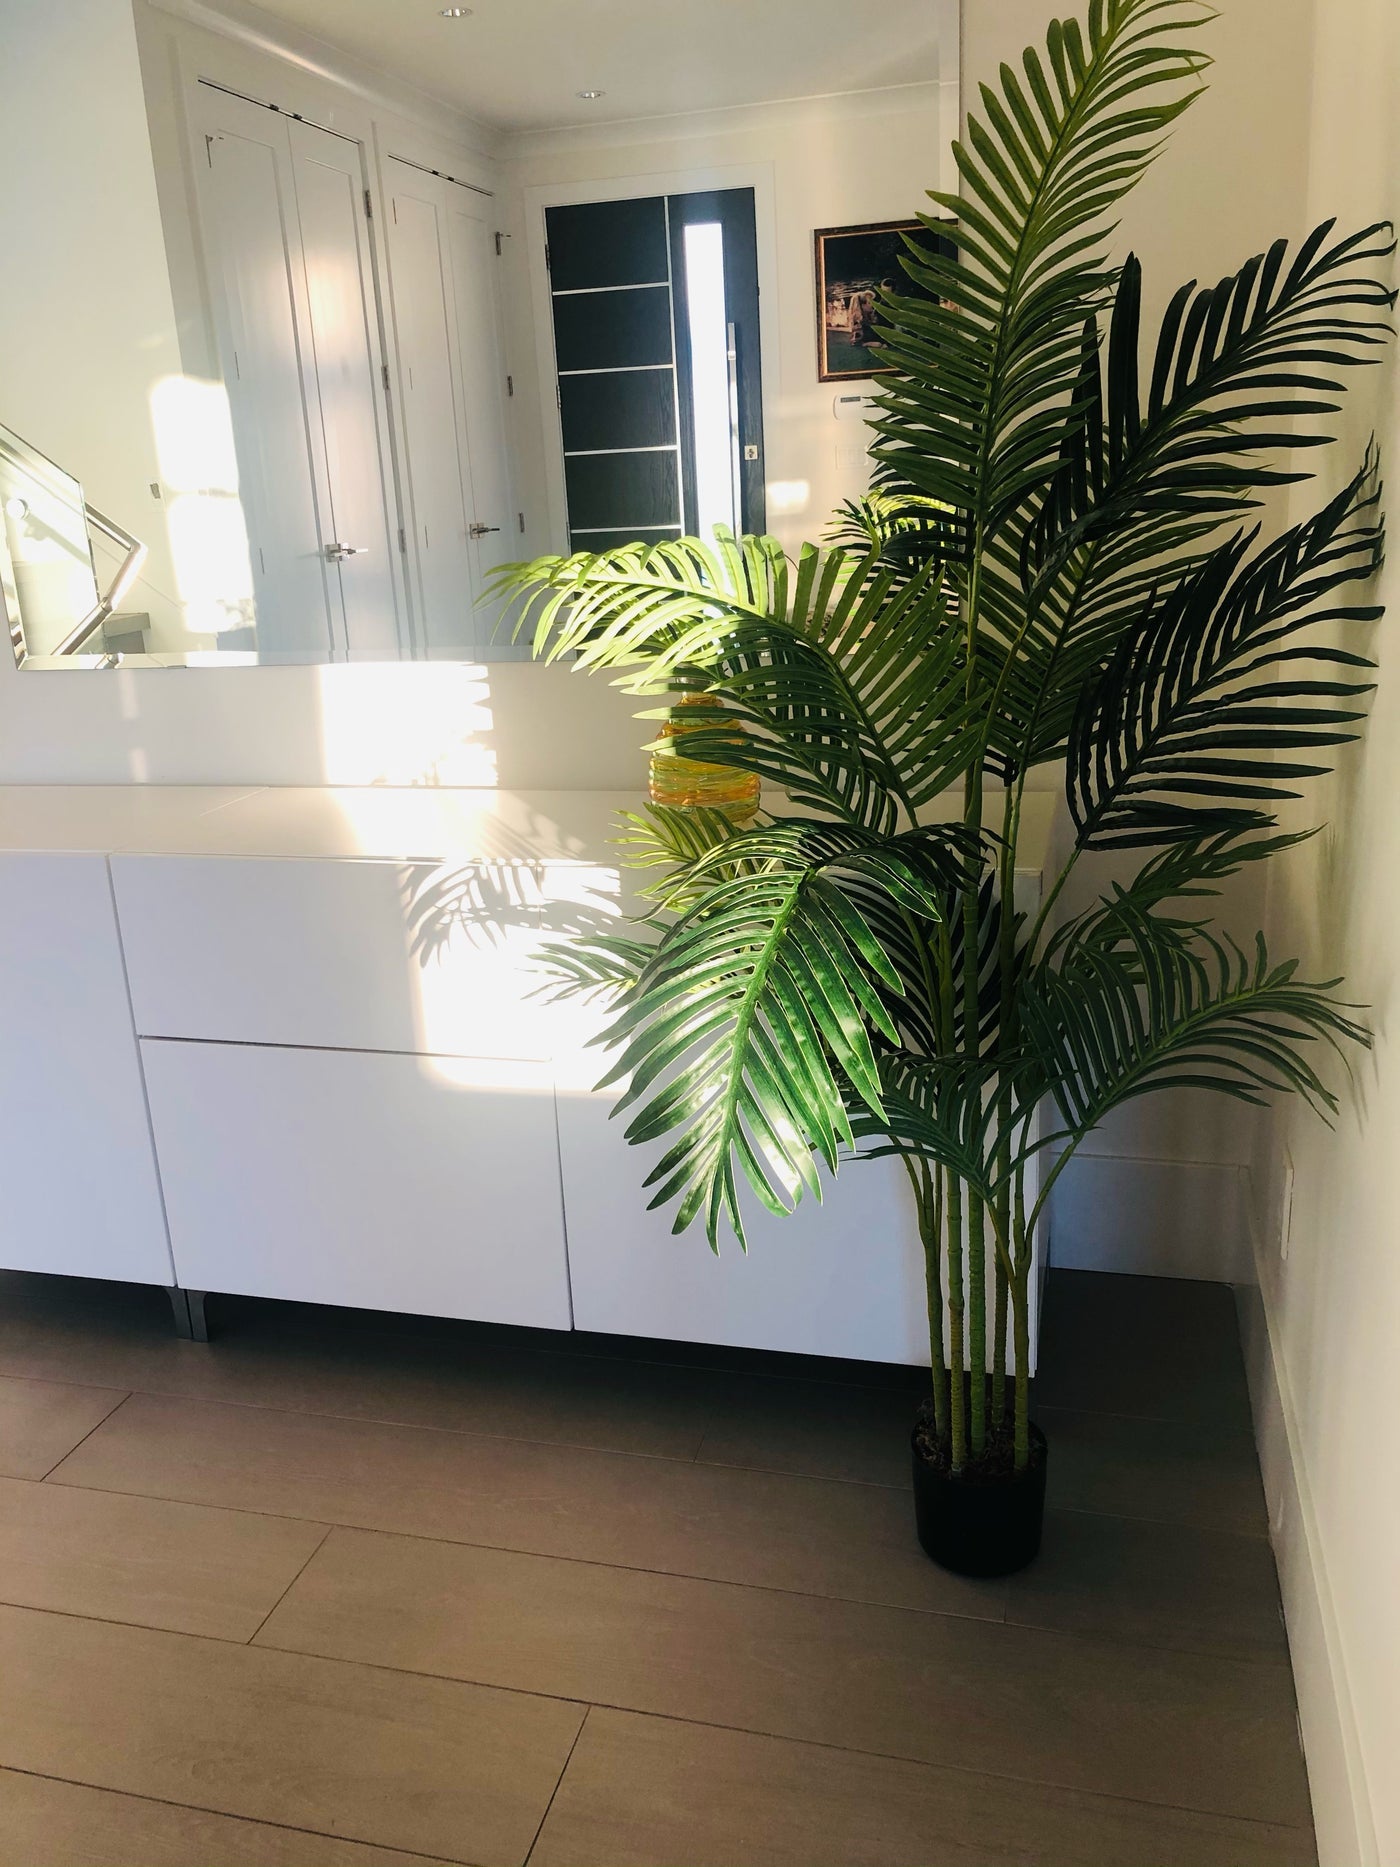 Where Can I Buy Artificial Palm Trees On Sale Online?